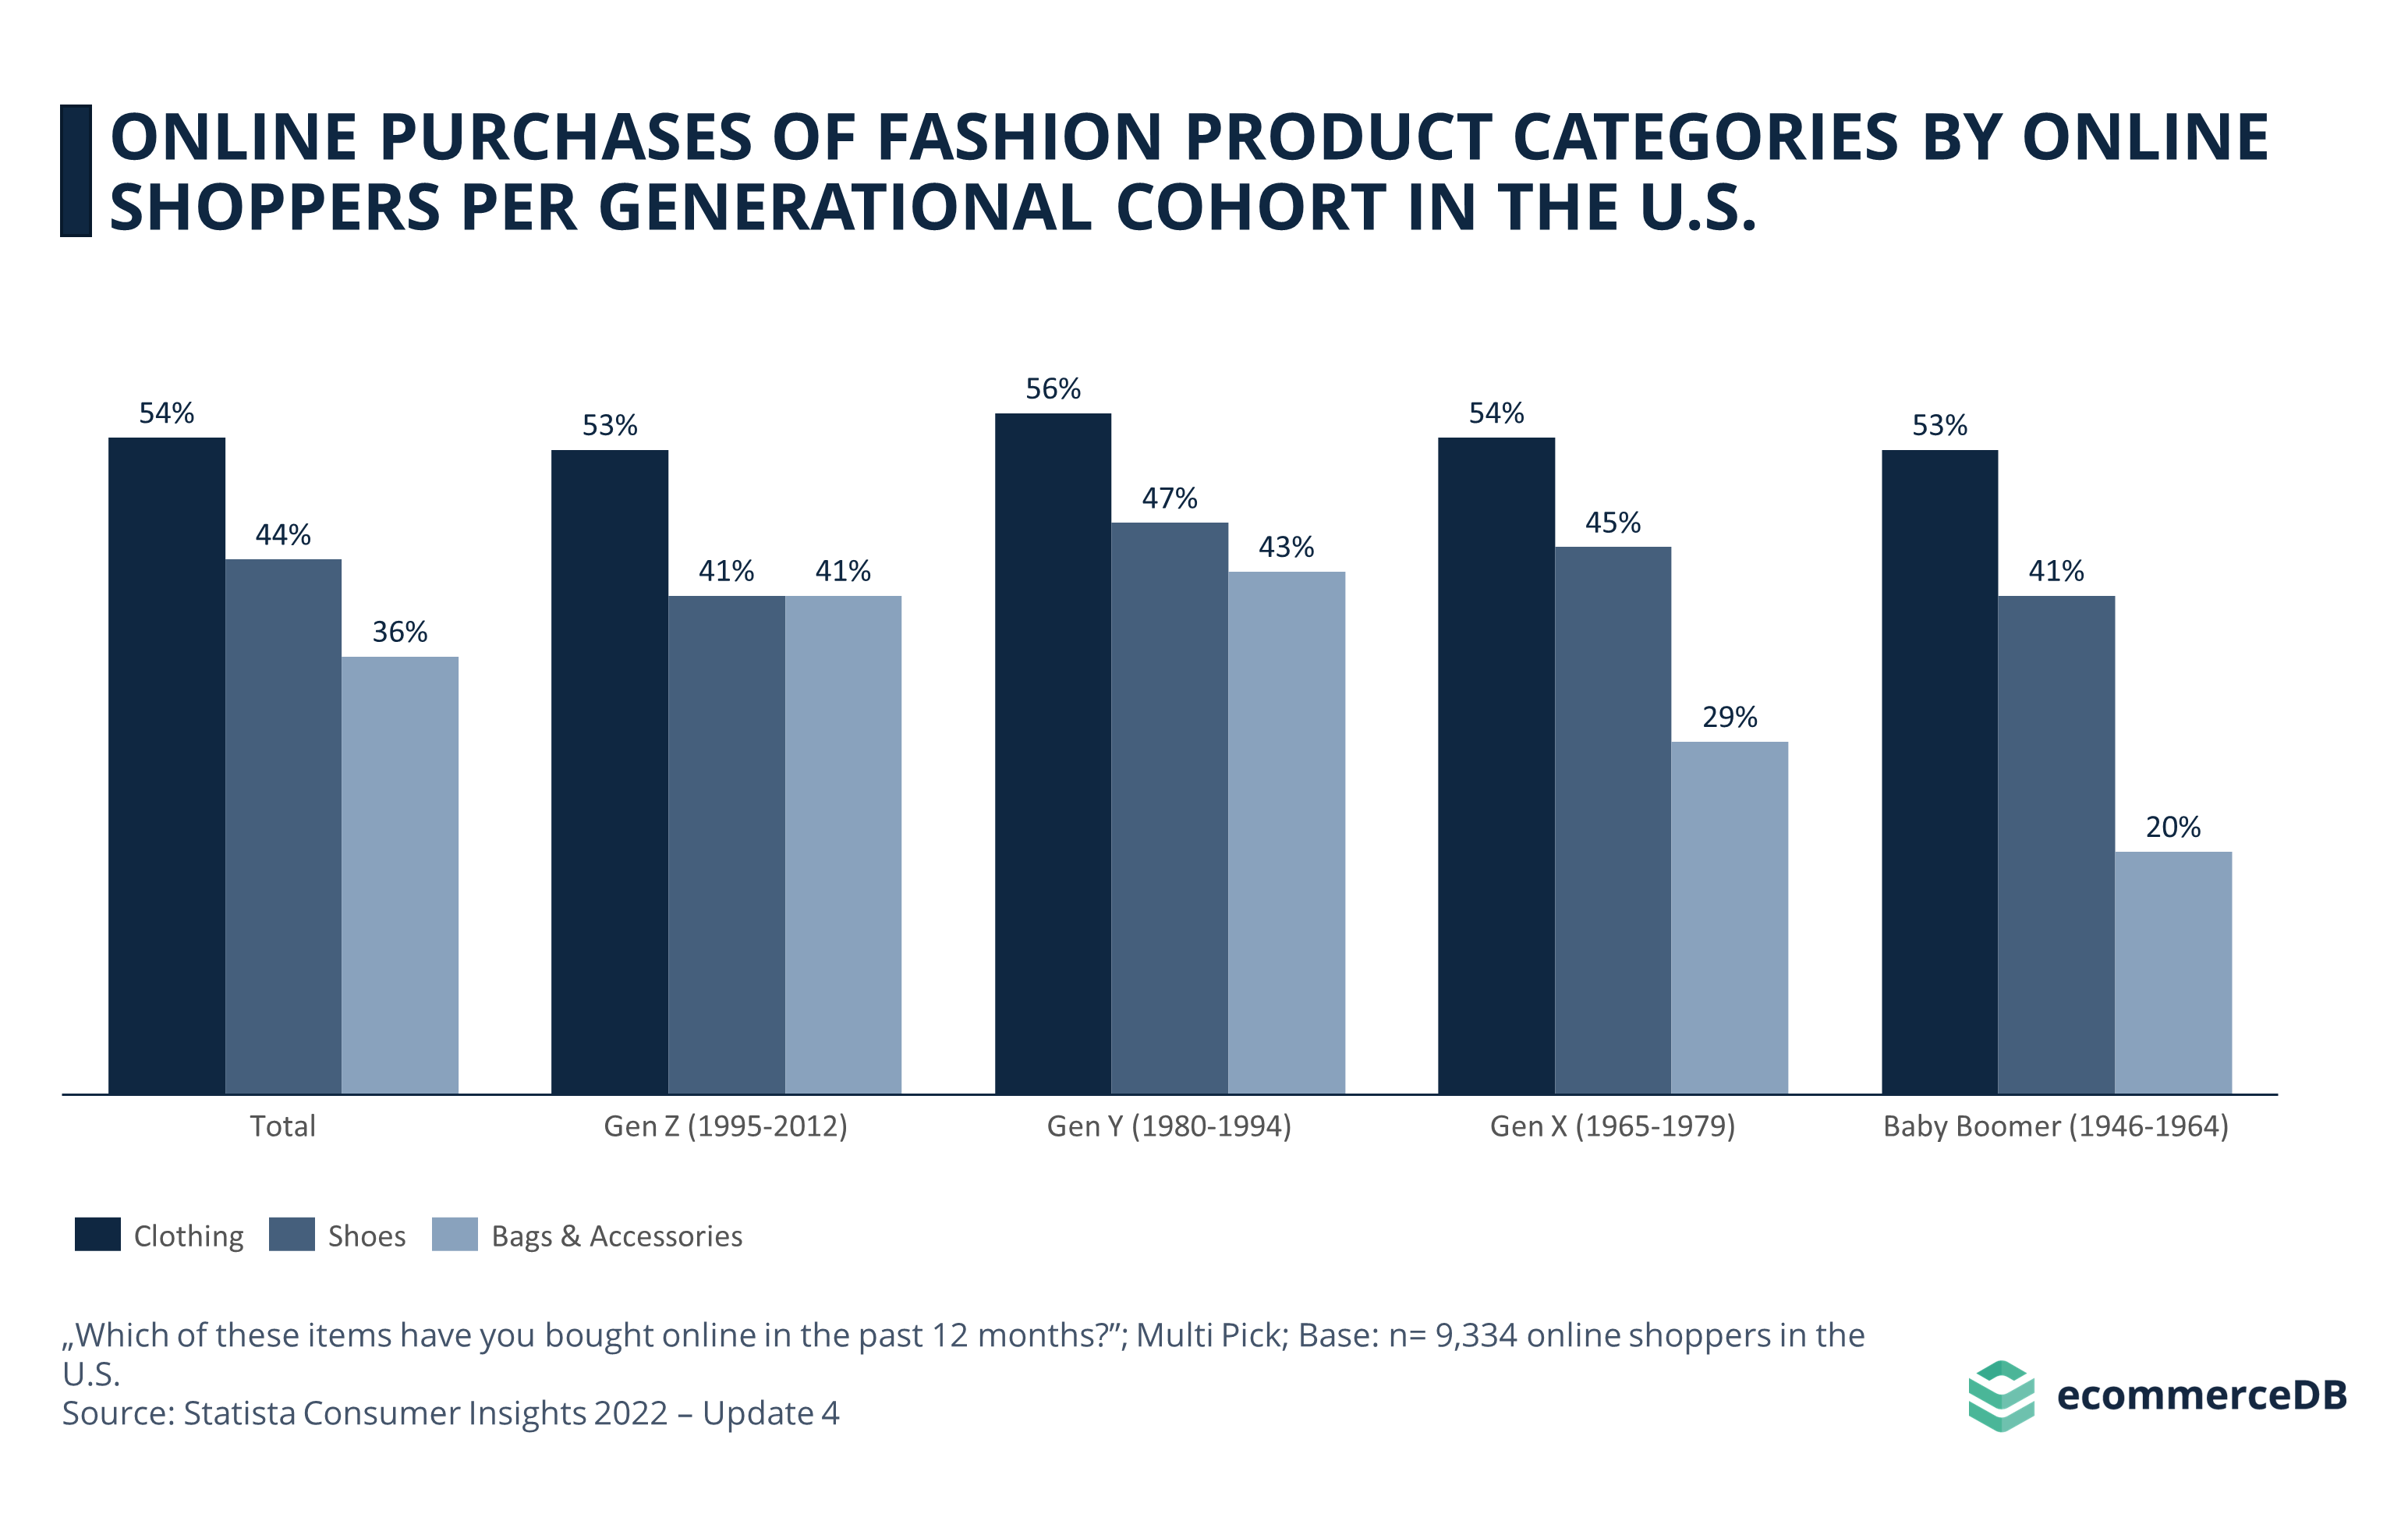 How Different Generations Buy Fashion Online in the U.S. | ECDB.com